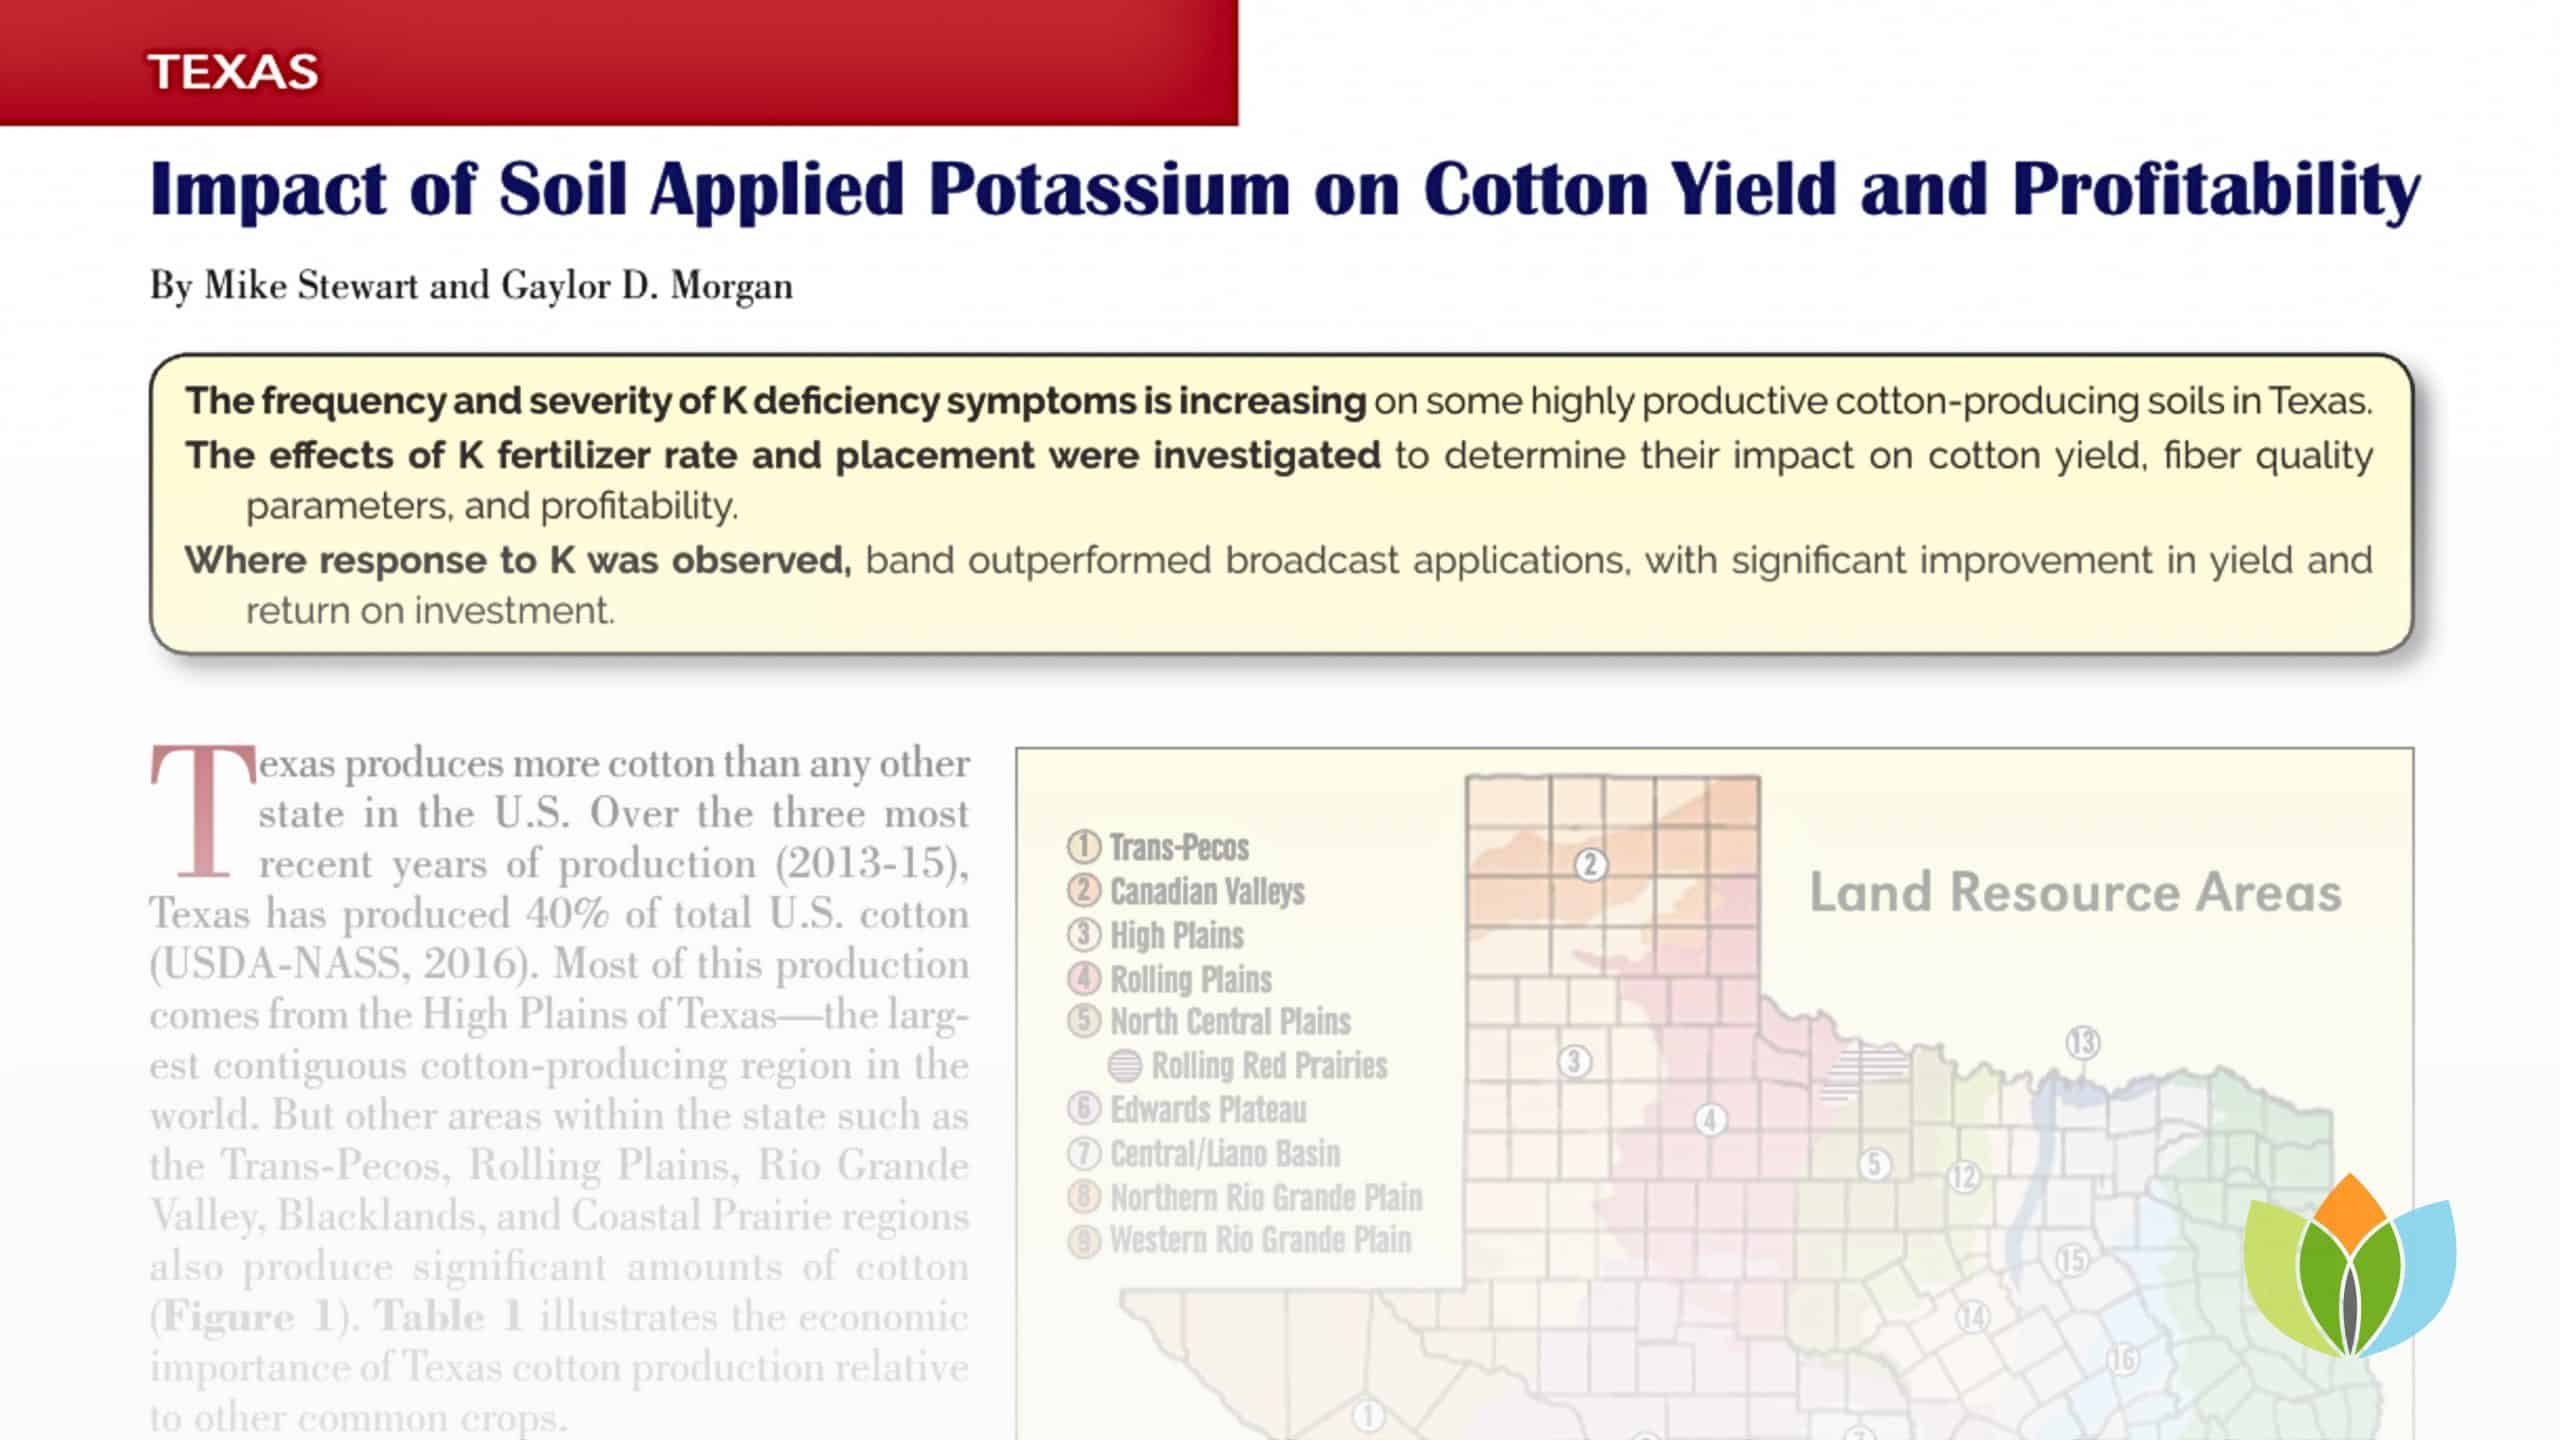 Impact of Soil Applied Potassium on Cotton Yield and Profitability in Texas